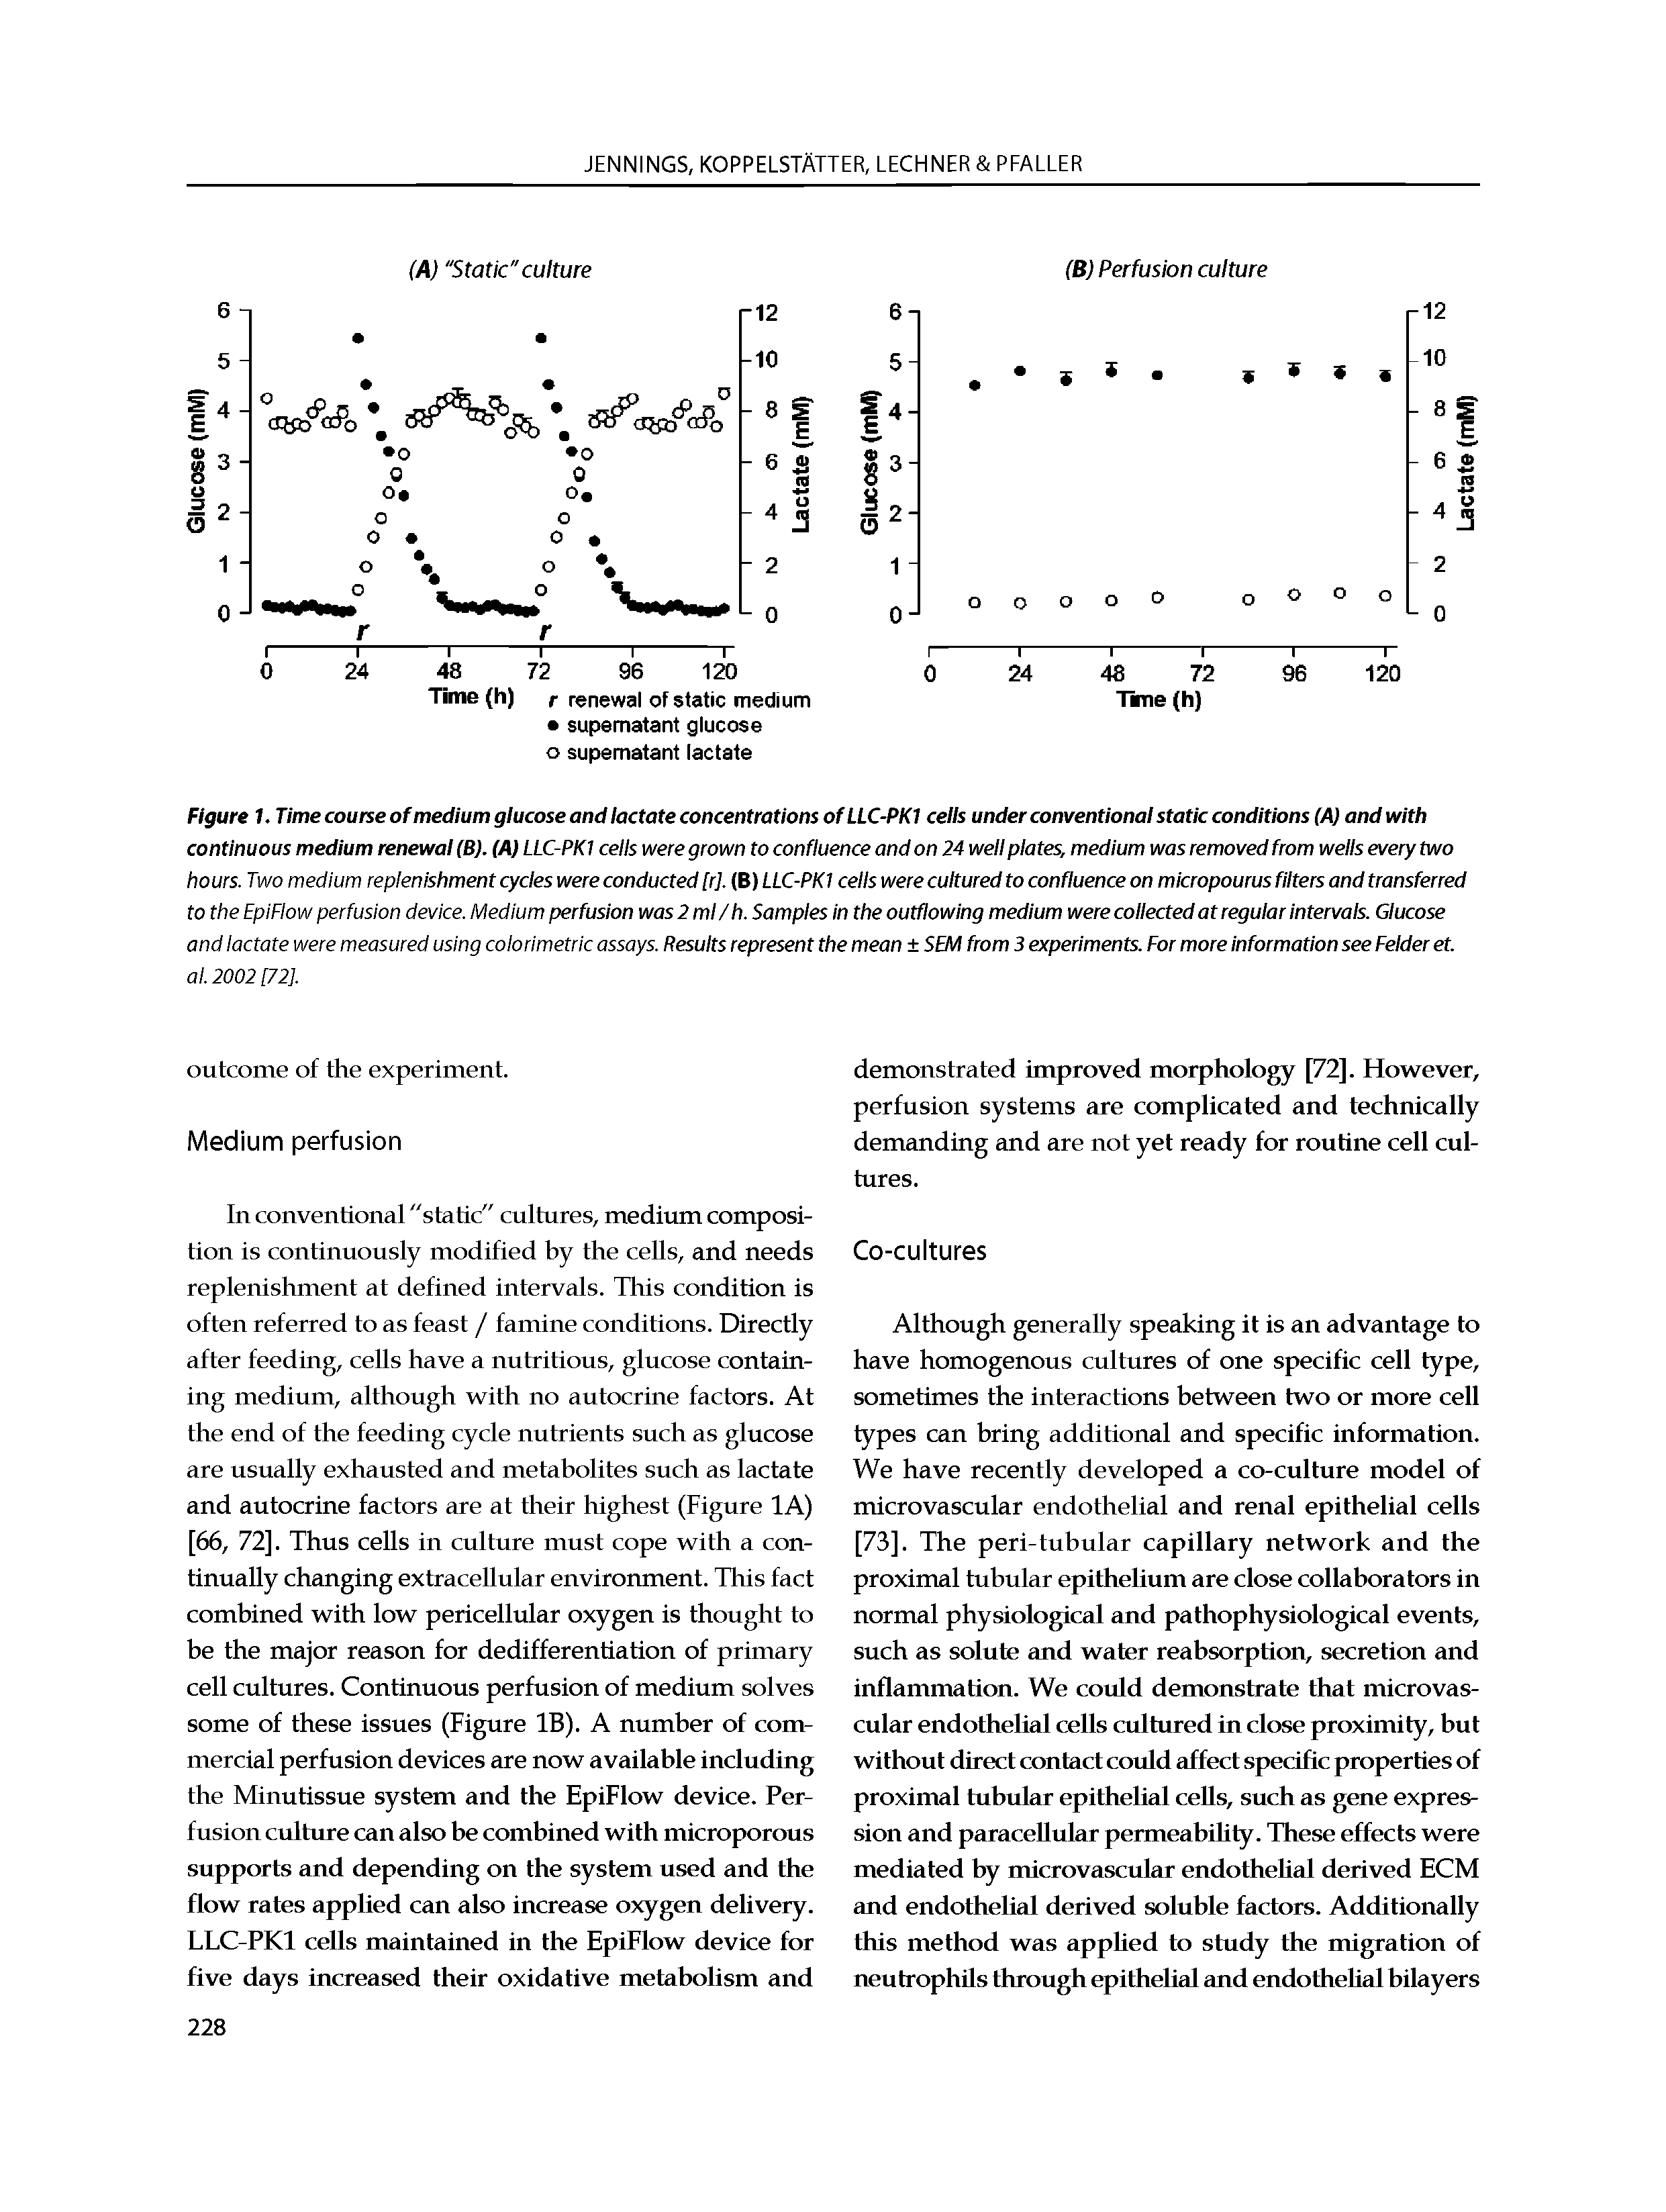 Figure 1. Time course of medium glucose and lactate concentrations ofLLC-PKI ceiis under conventionai static conditions (A) and with continuous medium renewai (B). (A) LLC-PKi cells were grown to confluence and on 24 well plates, medium was removed from wells every two hours. Two medium replenishment cycles were conducted [r], (B) LLC-PK1 cells were cultured to confluence on micropourus filters and transferred to the EpiFlow perfusion device. Medium perfusion was 2 mi/h. Sampies in the outflowing medium werecoiiectedatreguiarintervais. Giucose and lactate were measured using colorimetric assays. Results represent the mean SEM from 3 experiments. For more information see Felder et. al. 2002 [72].